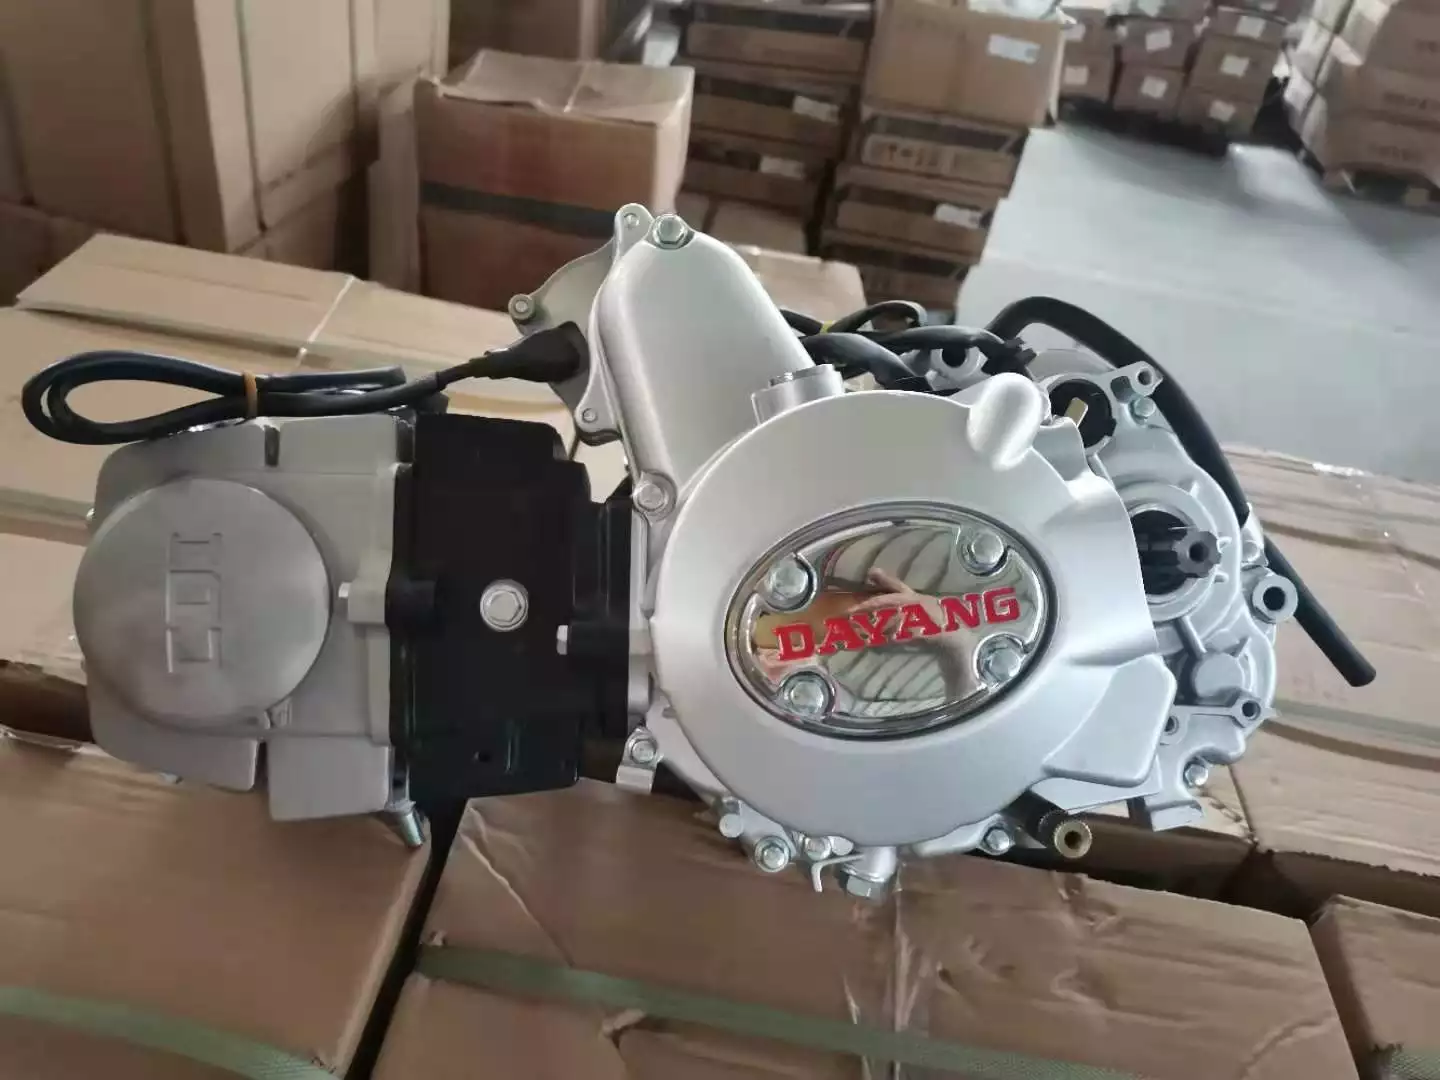 2021 hot selling Lifan DAYANG 125CC air cooling engines assembly for tricycles made in Chongqing factory direct supply